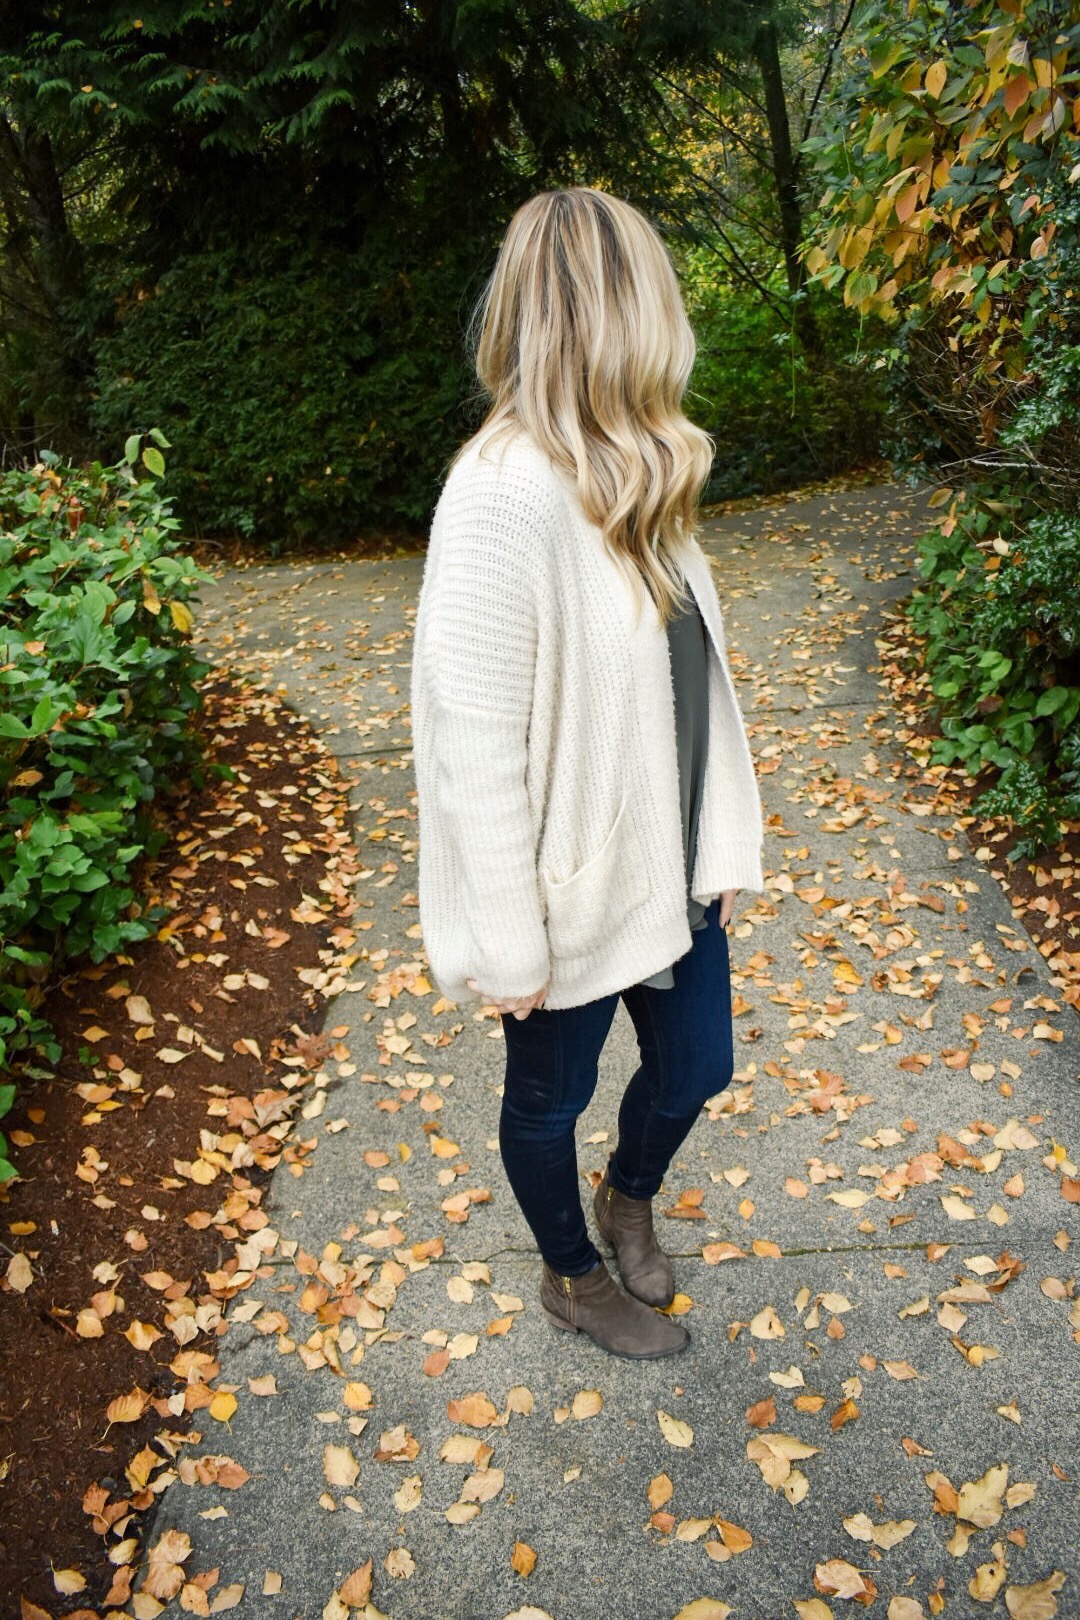 The best cardigan for fall outfits